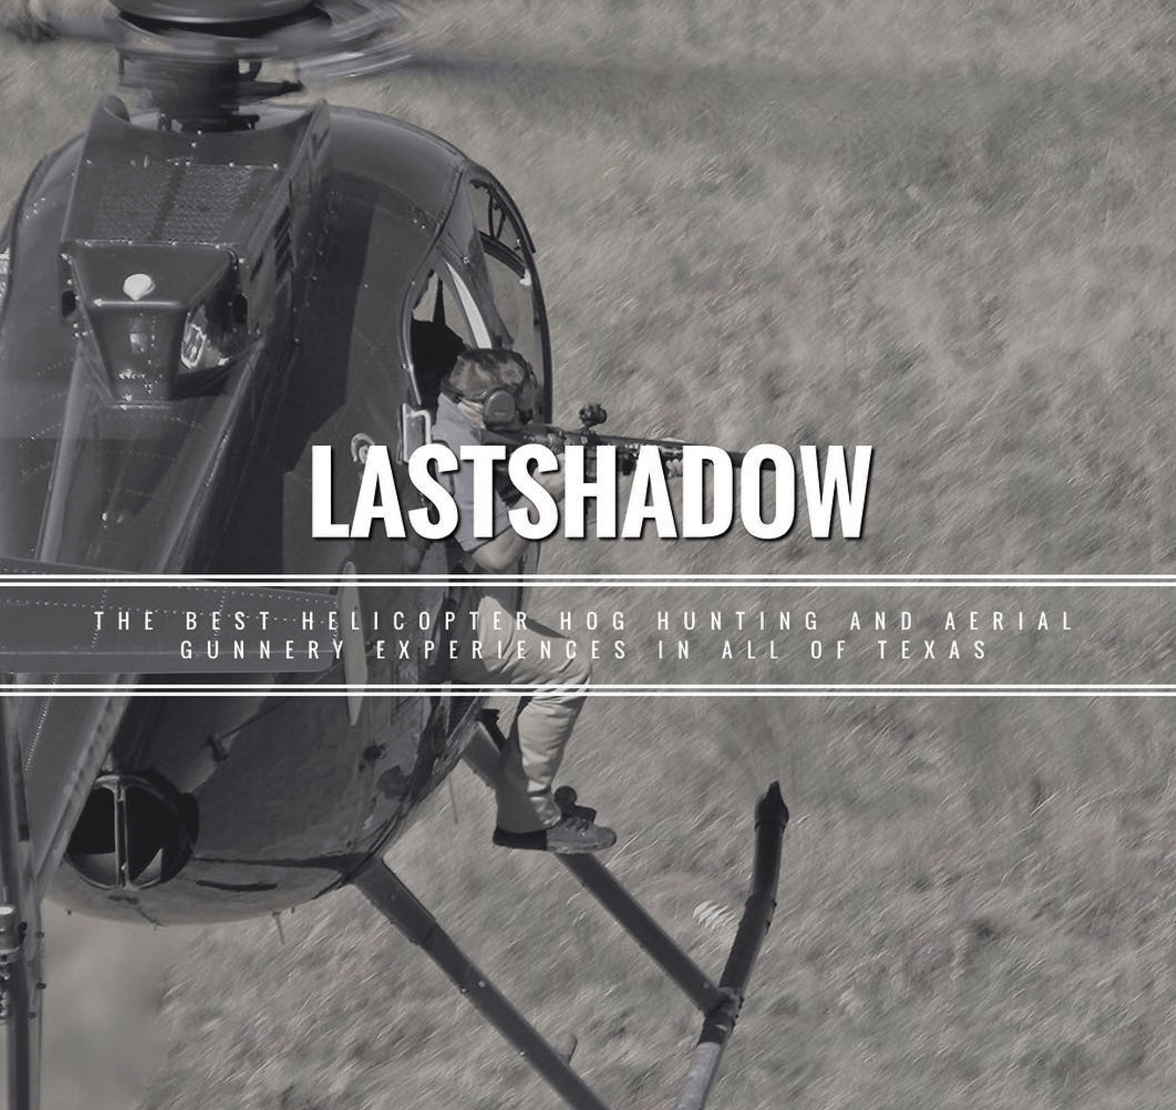 Last Shadow: Full Service Excursion